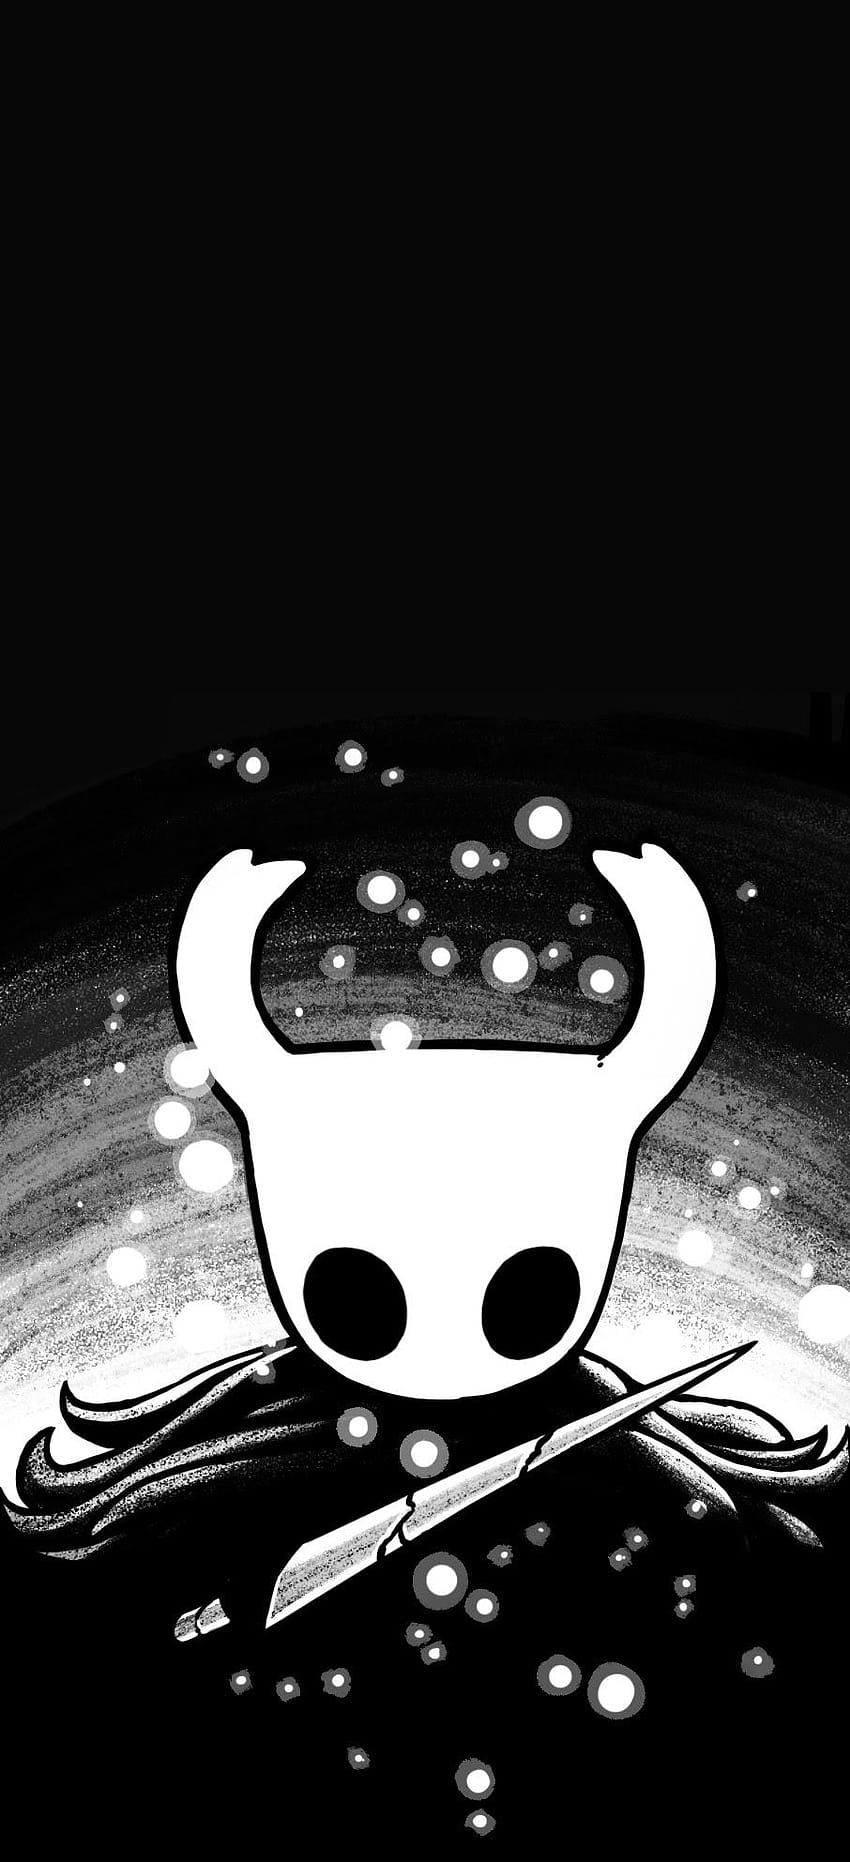 Made an amoled some time ago. Forglt to svare it, here, phone hollow knight HD phone wallpaper